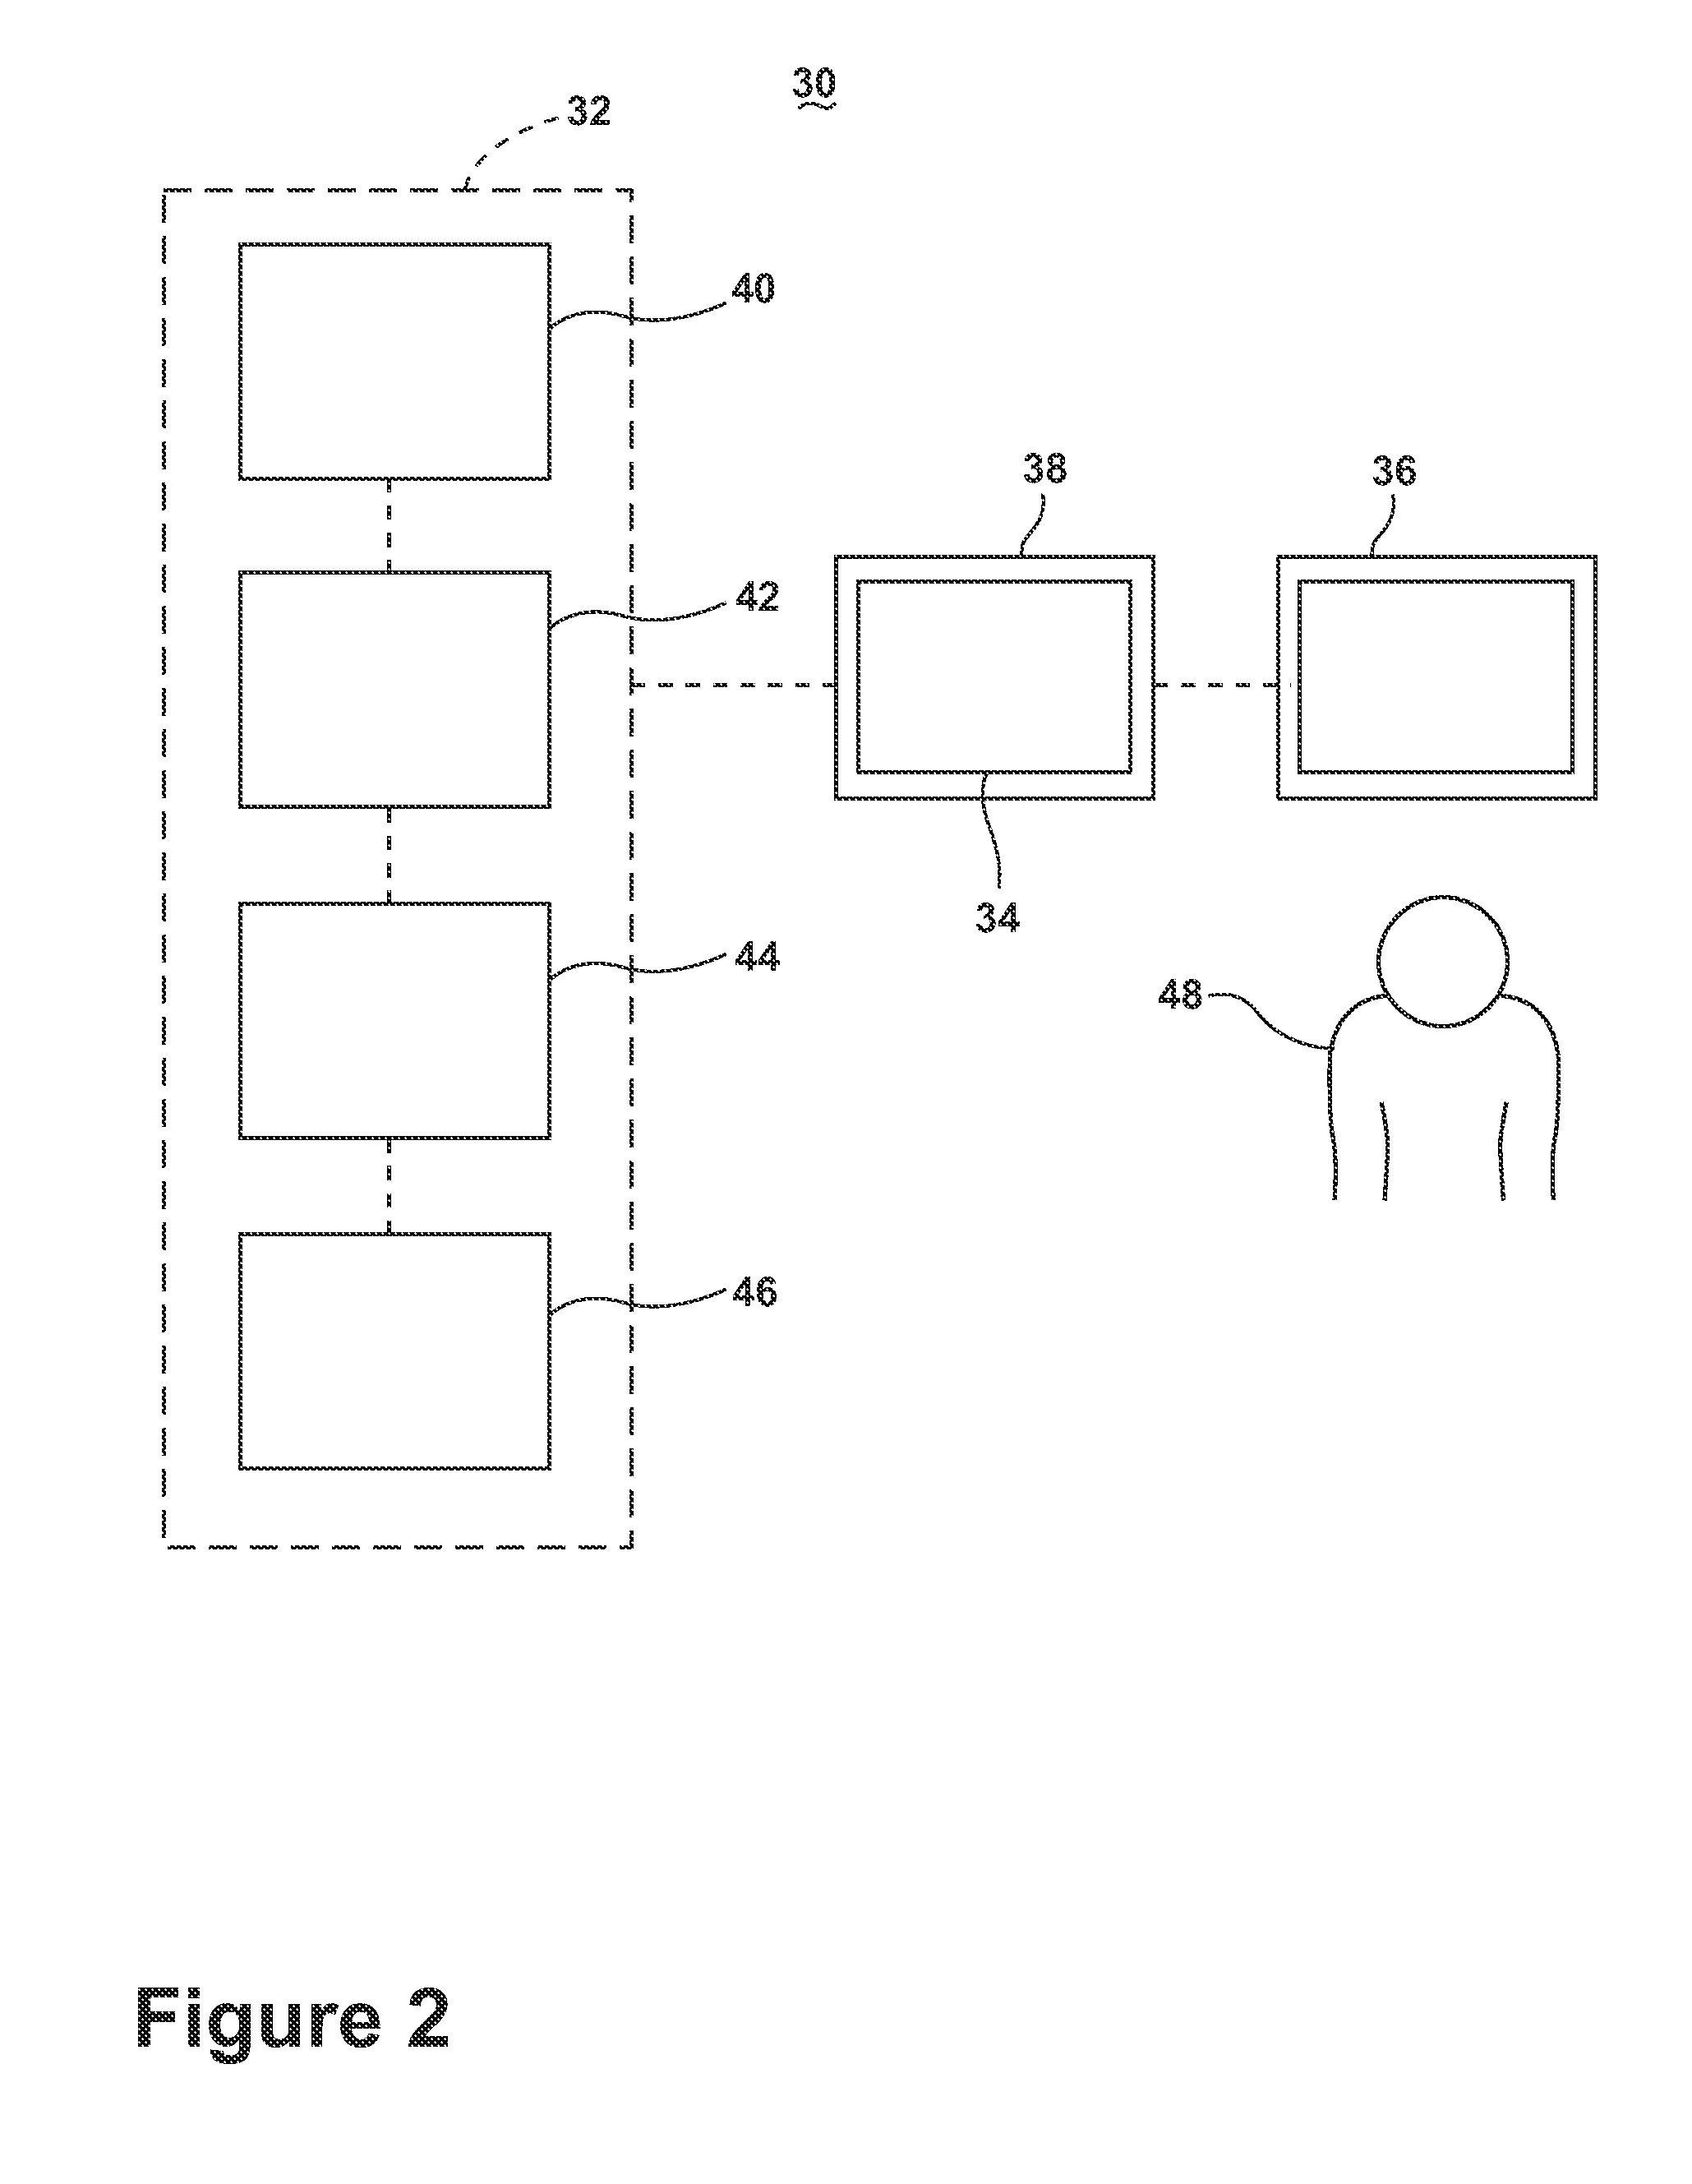 System and method for controlling operation of an airline